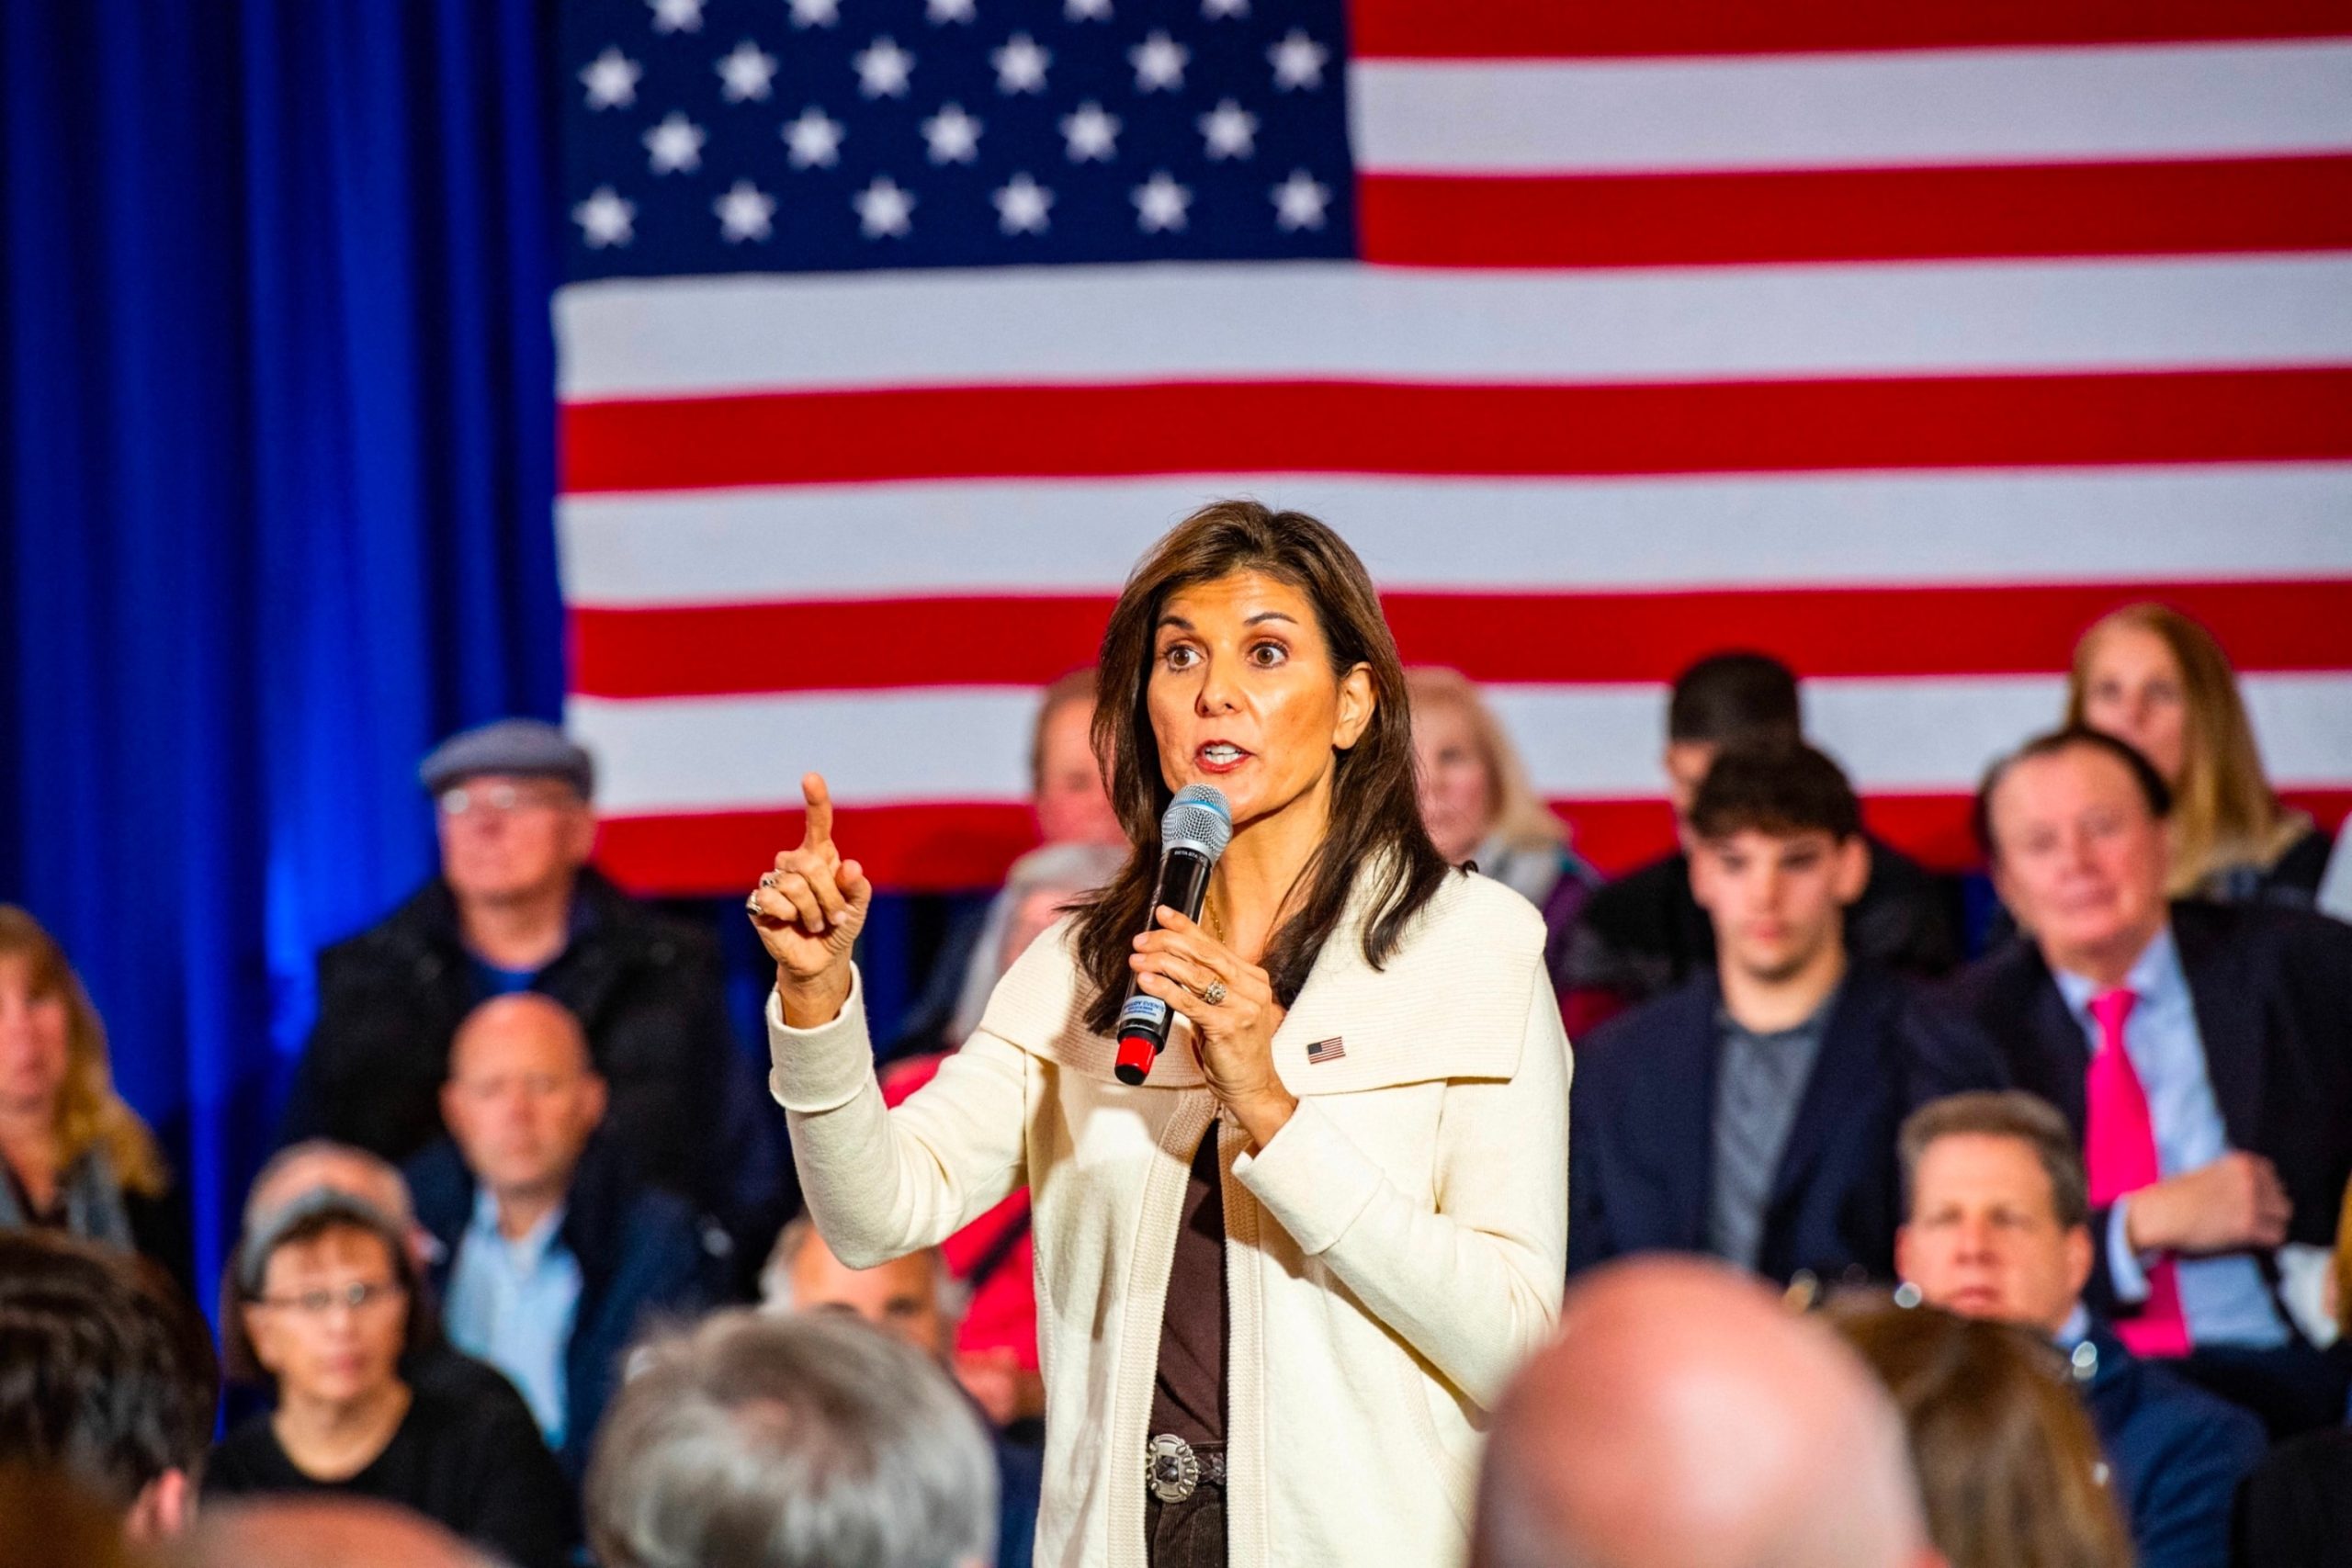 Experts say Nikki Haley's 2024 campaign gains traction but faces recent setbacks